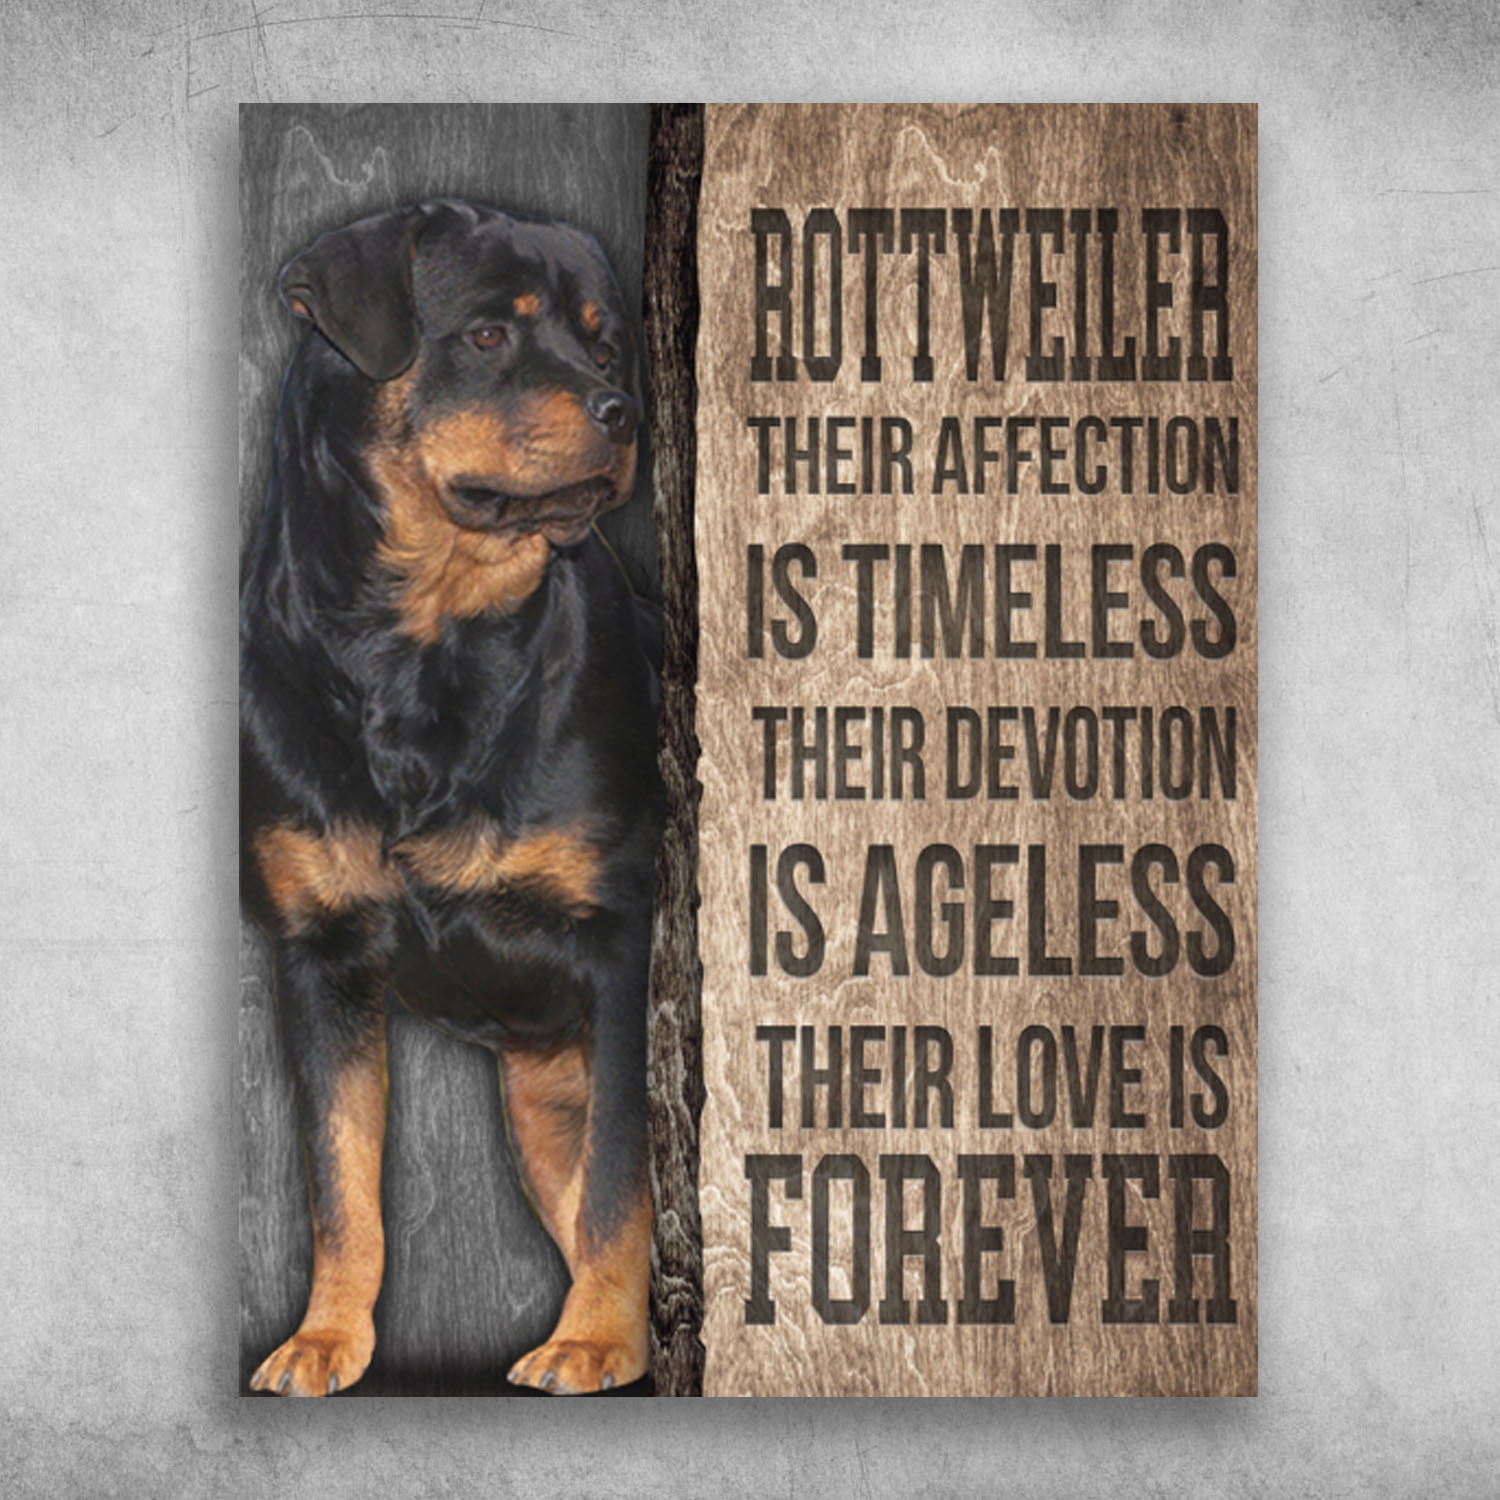 Rottweiler Their Affection Is Timeless Their Devotion Is Ageless